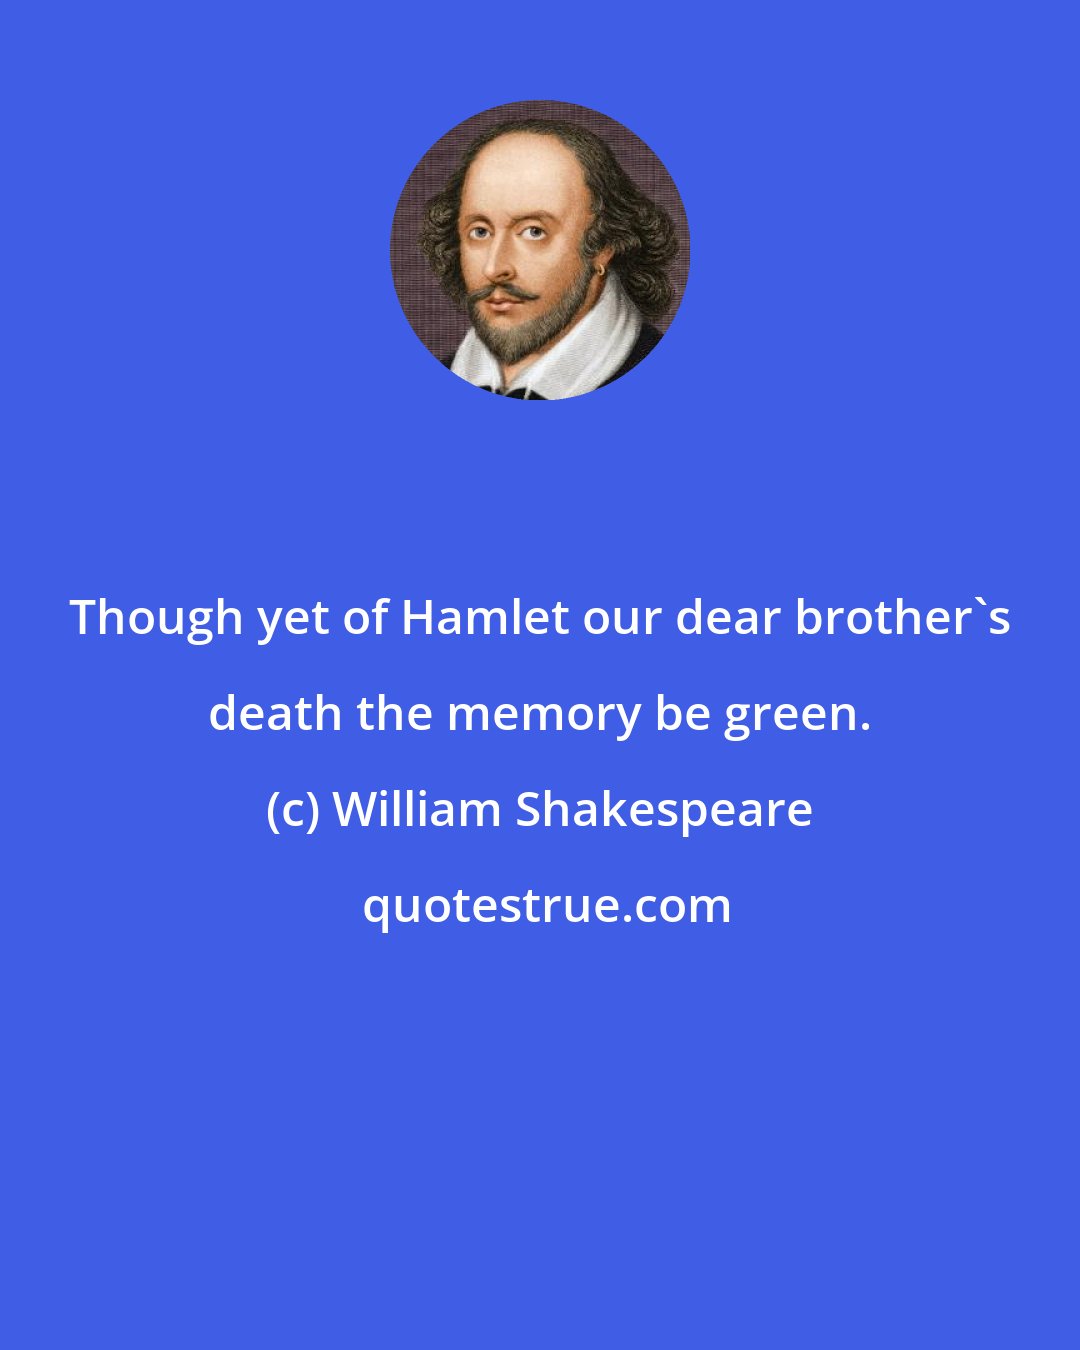 William Shakespeare: Though yet of Hamlet our dear brother's death the memory be green.